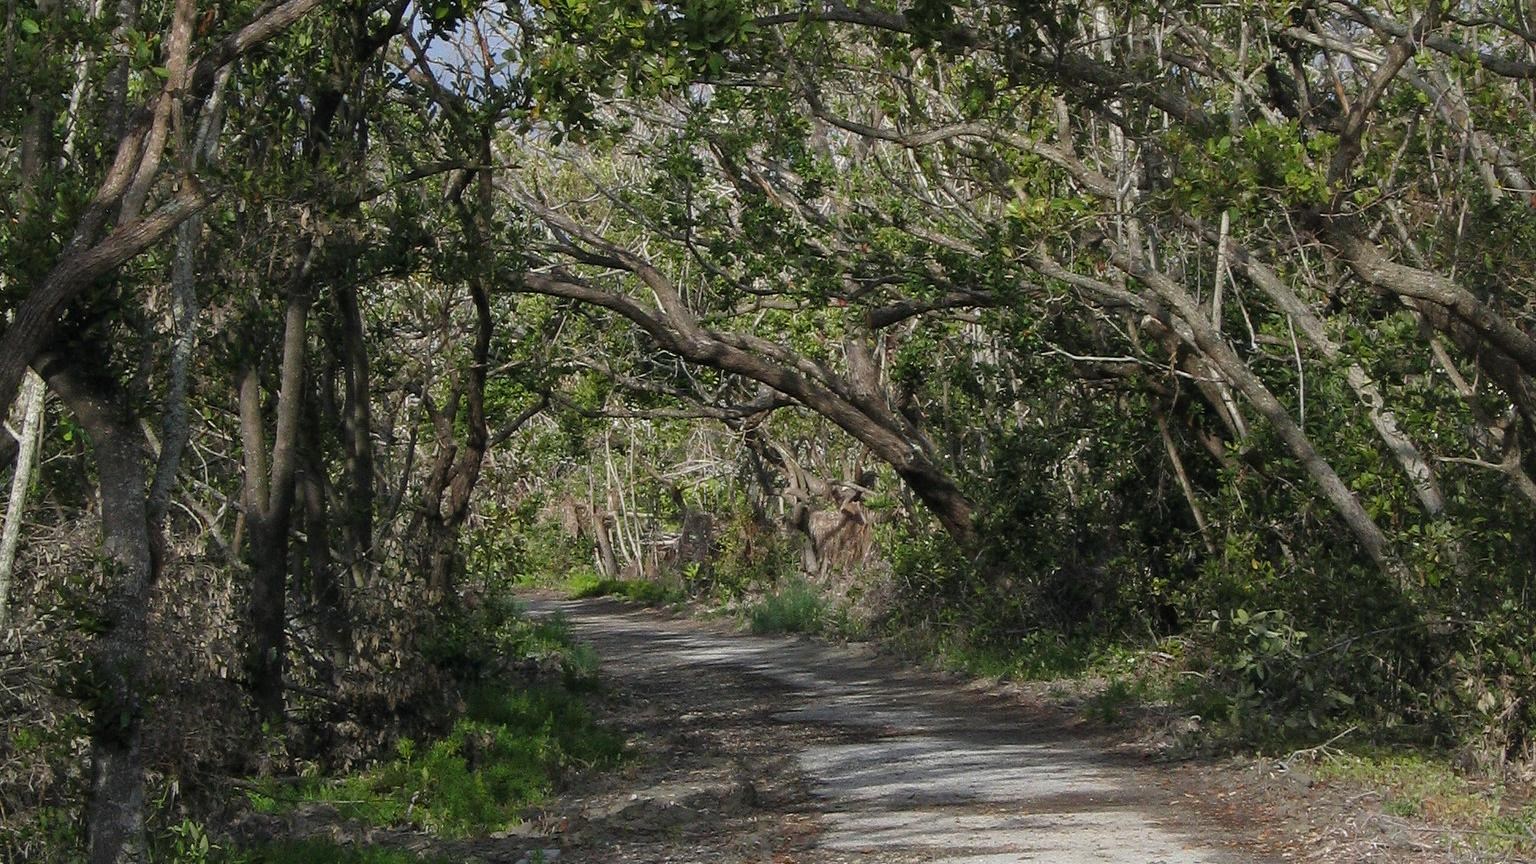 A 3 foot wide paved path underneath overhanging mangrove and tropical hardwood trees